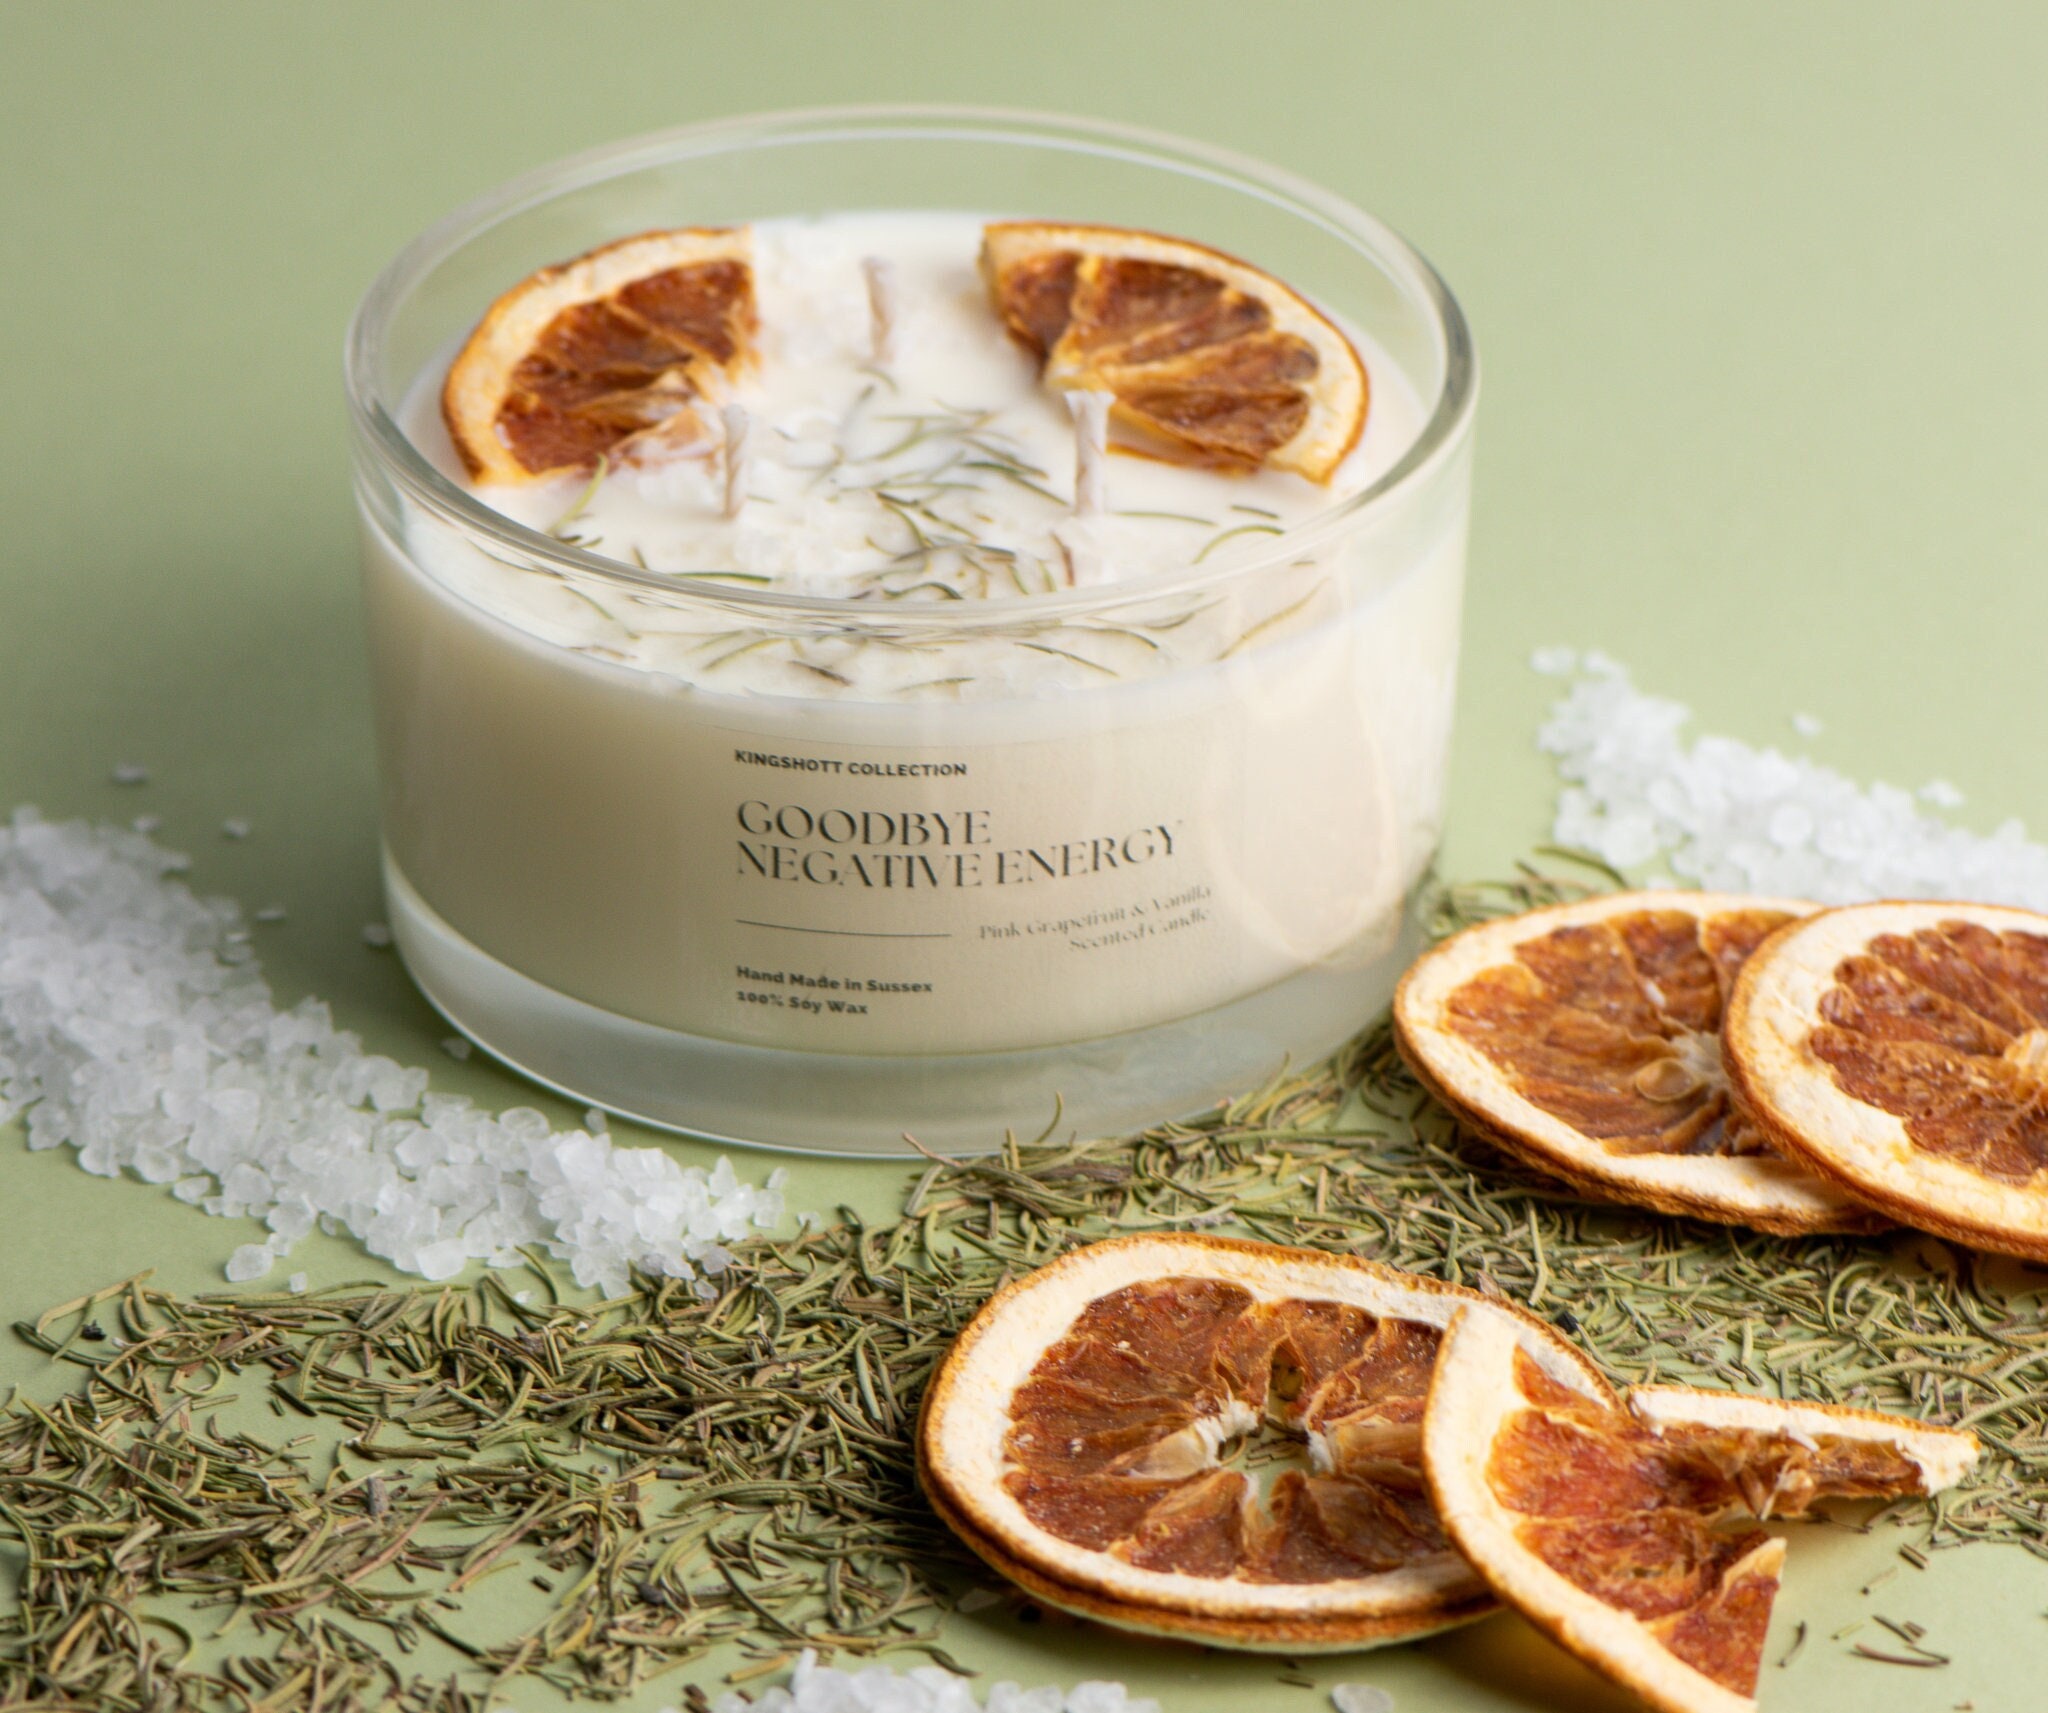 Grapefruit Soy Wax Candle, Long Lasting